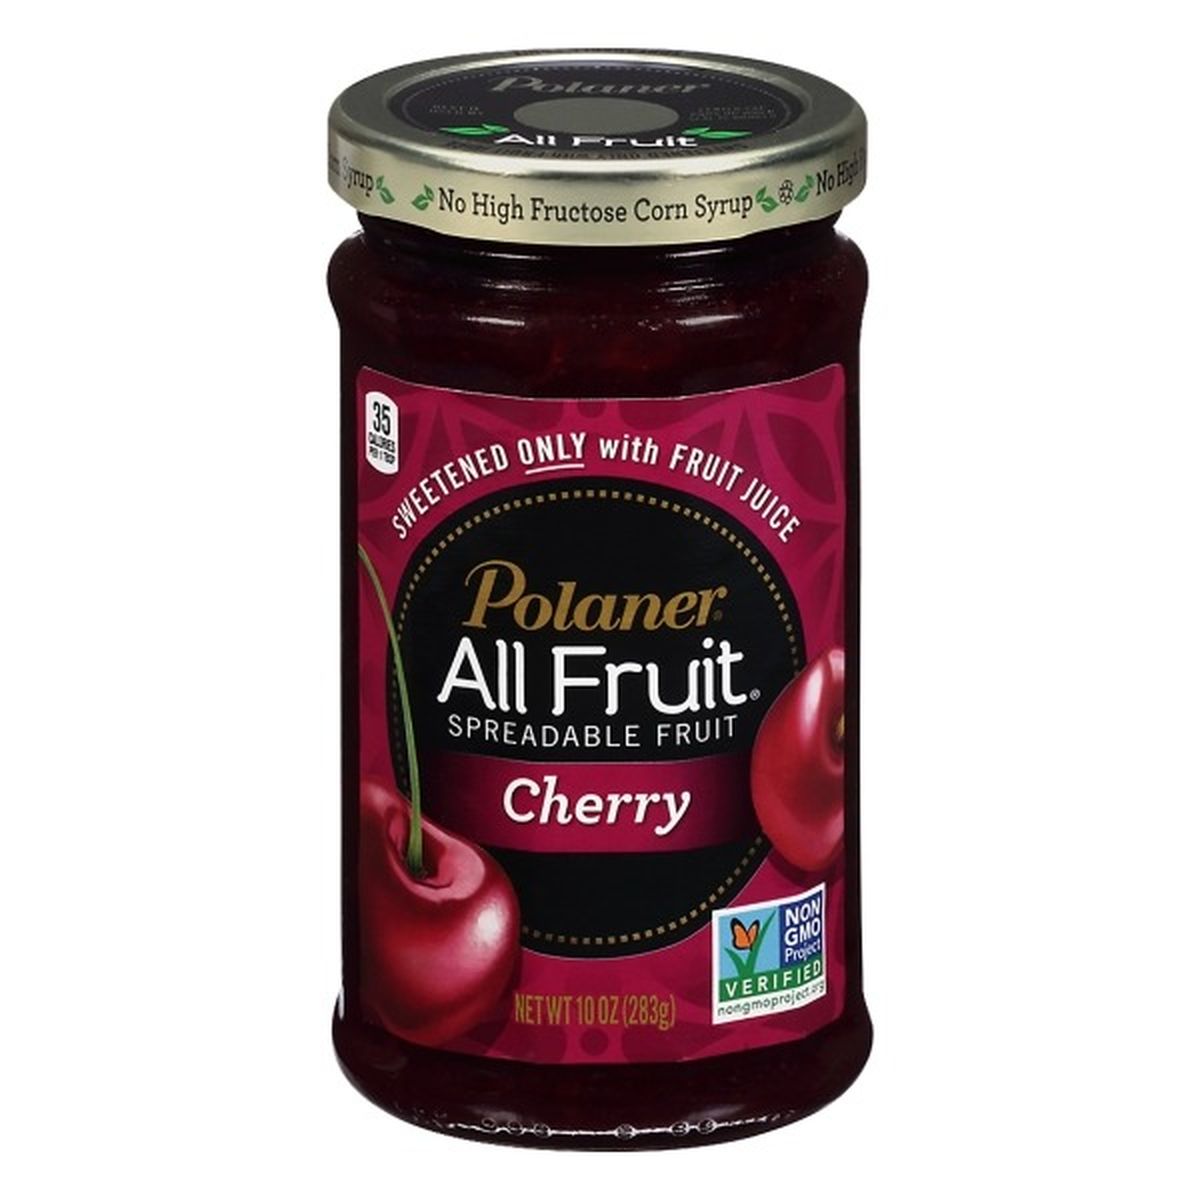 Calories in Polaner All Fruit Spreadable Fruit, Cherry